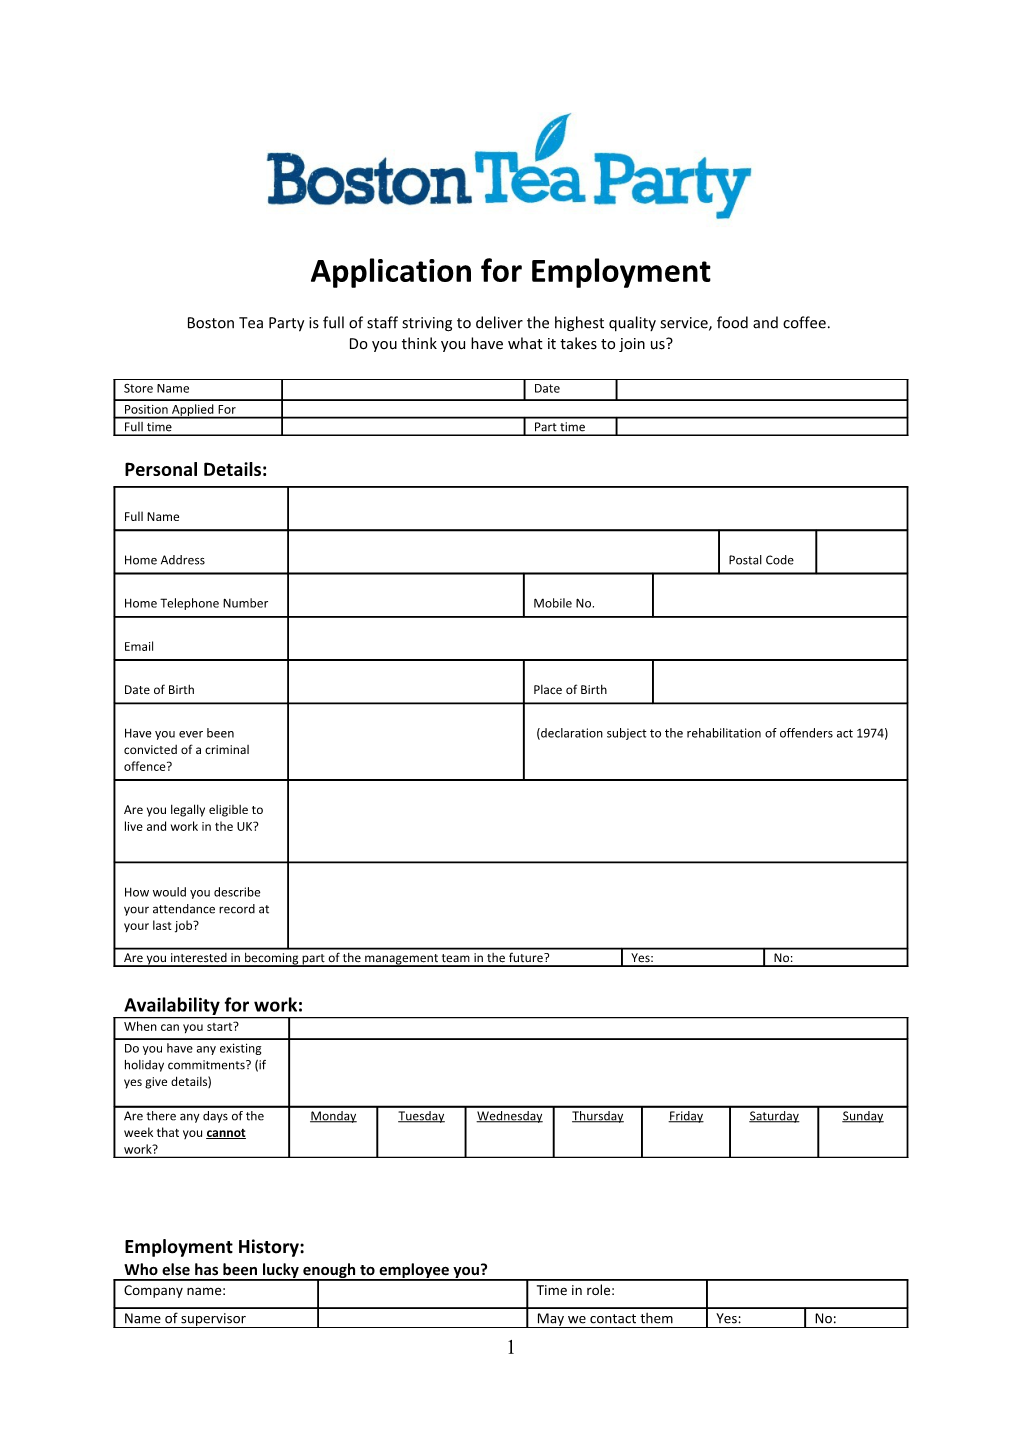 Application for Employment: the Boston Tea Party